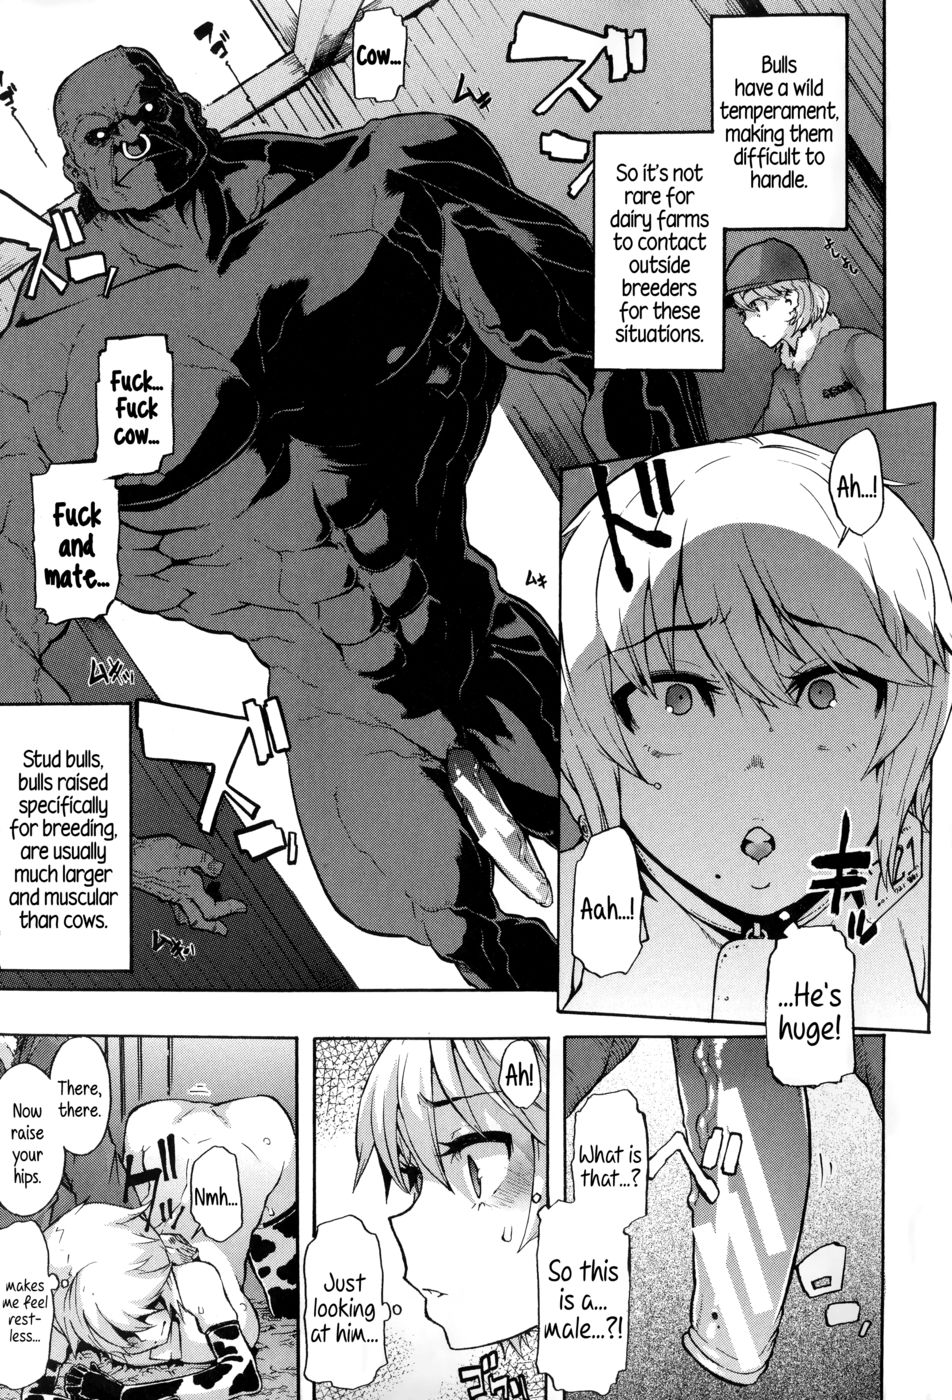 Demon Cow Comic Porn - A dairy cow's life-Read-Hentai Manga Hentai Comic - Page: 9 - Online porn  video at mobile